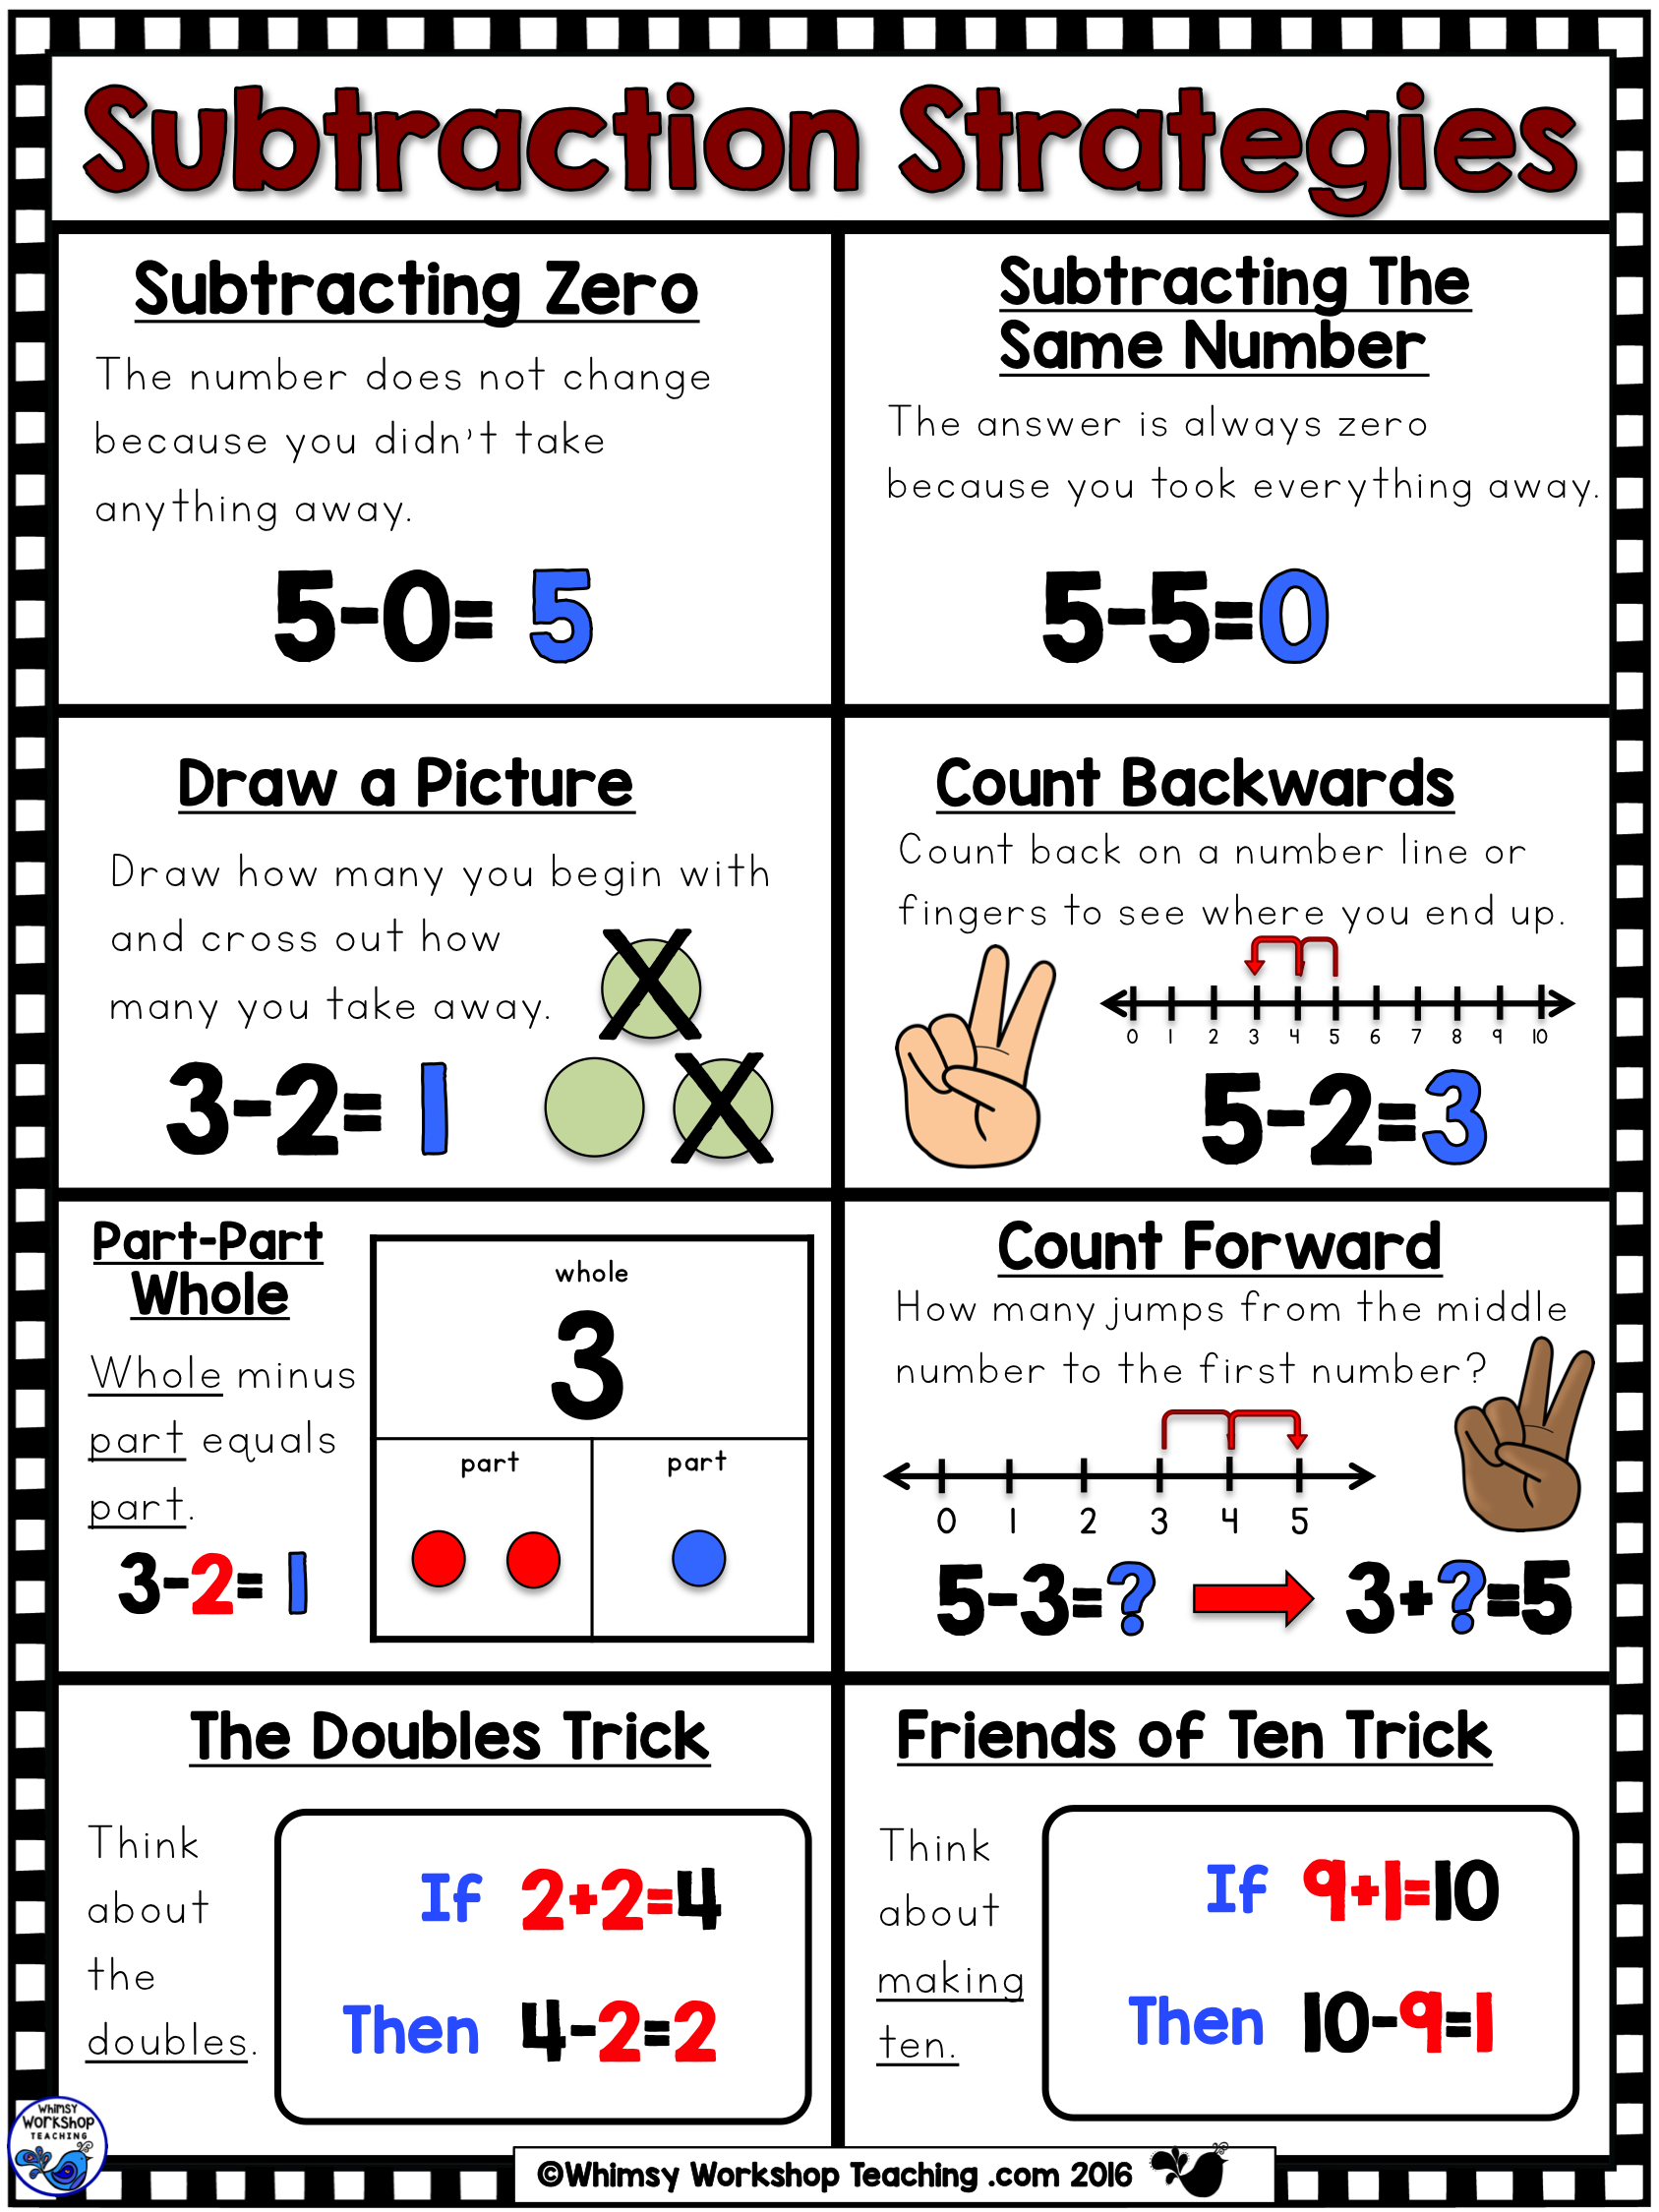 subtraction strategies poster Whimsy Teaching